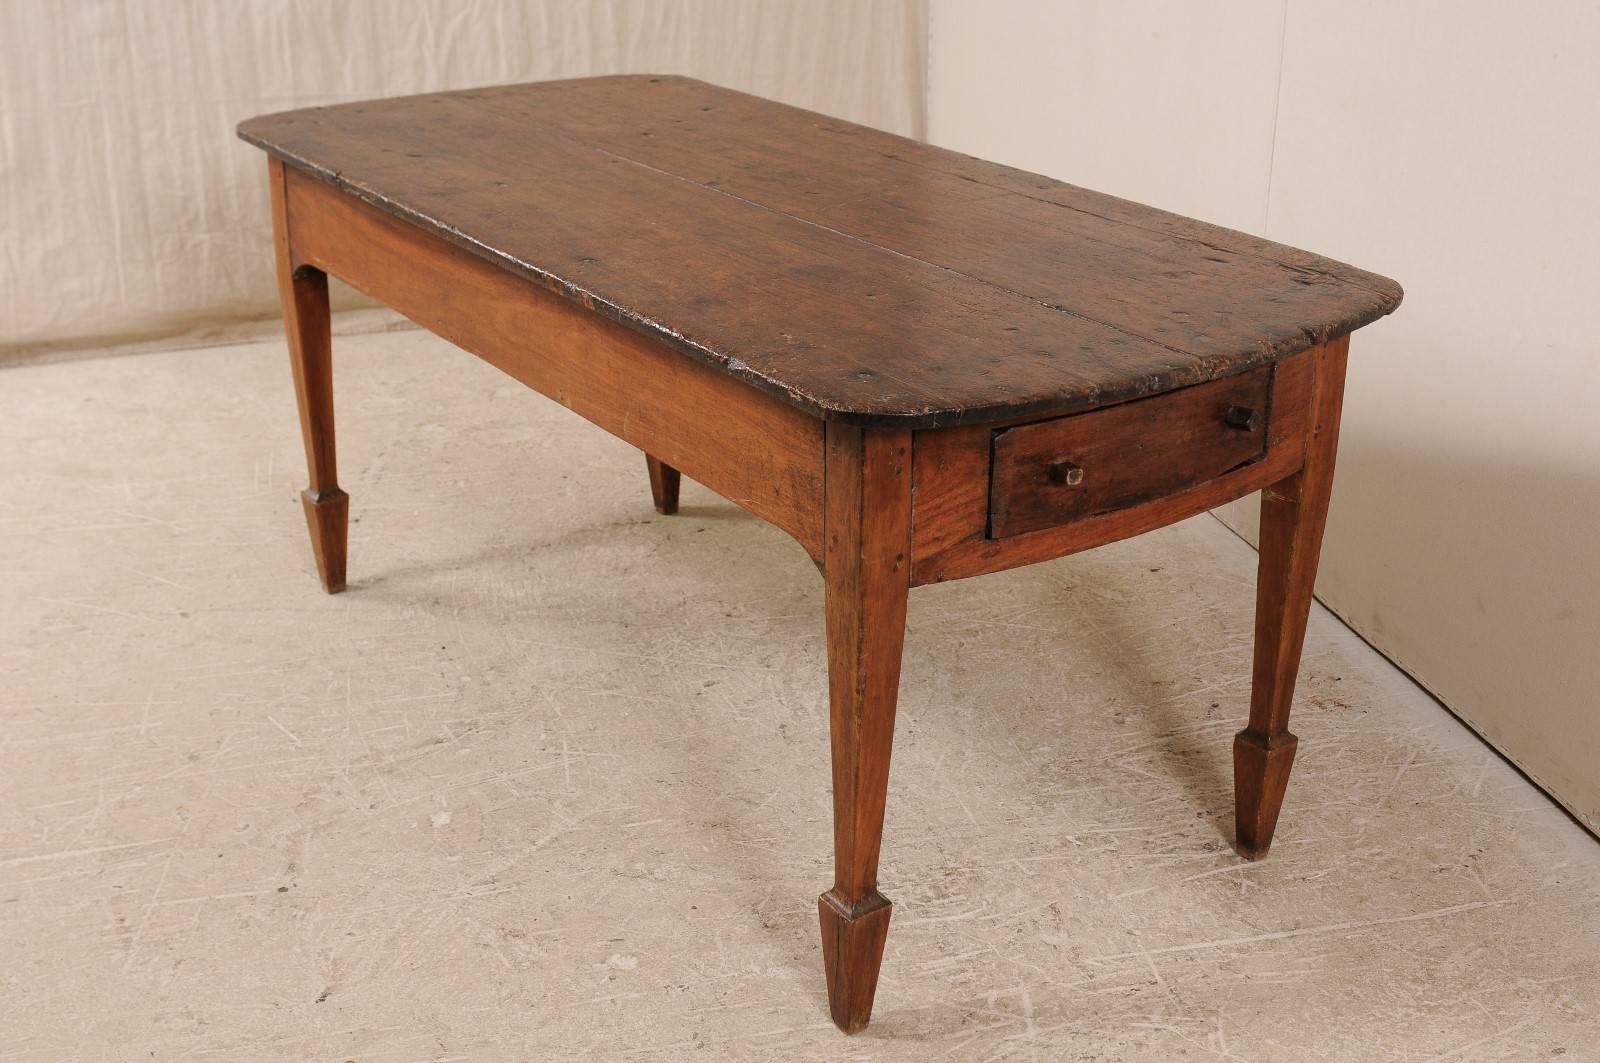 Early 20th Century Brazilian Peroba Wood Table with Two Drawers and Spaded Feet 4